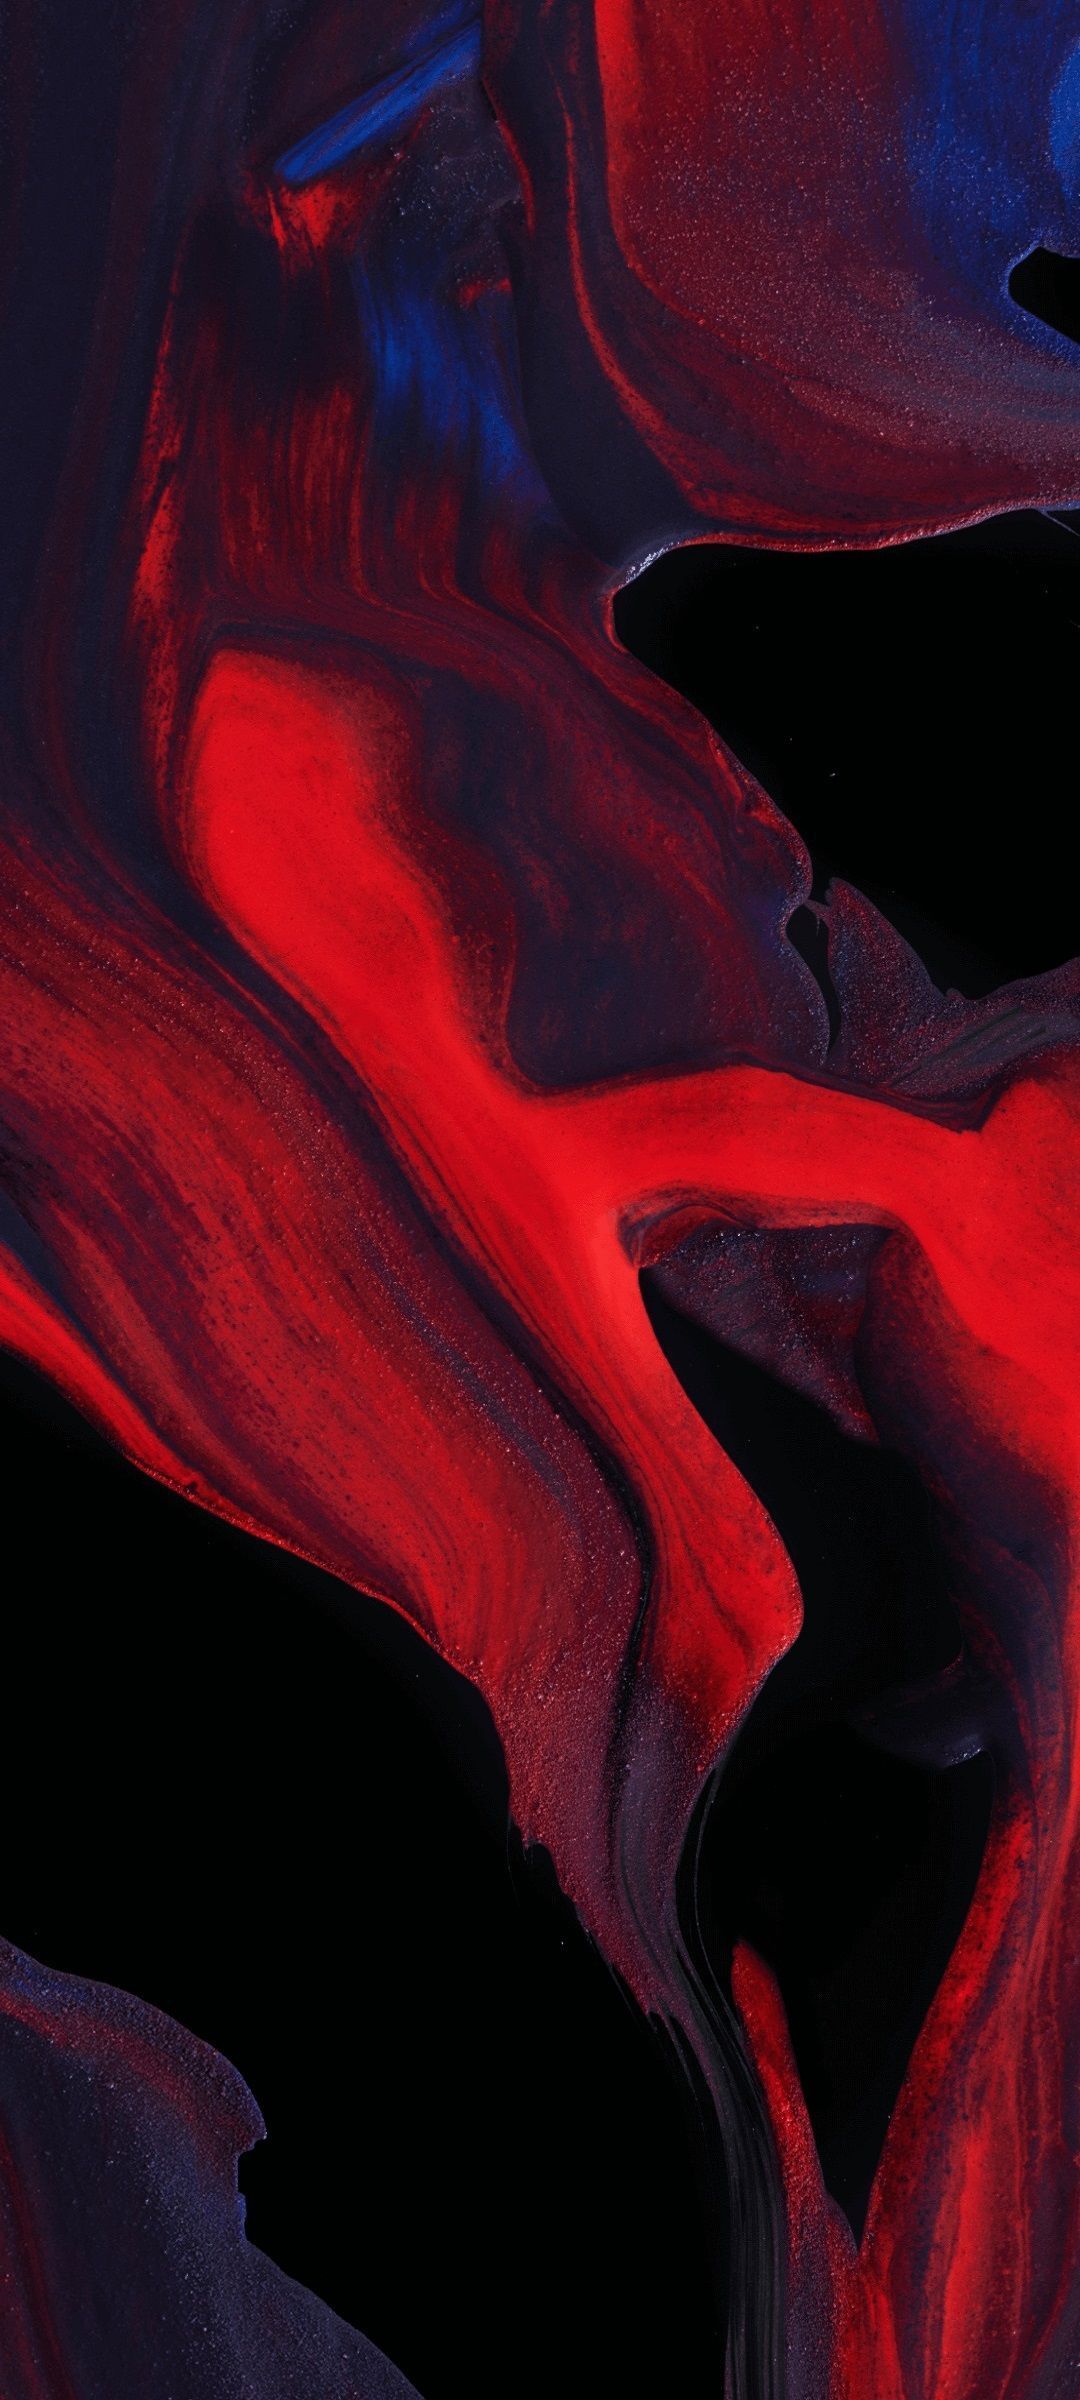 A close up of some red and blue paint - 1080x2400